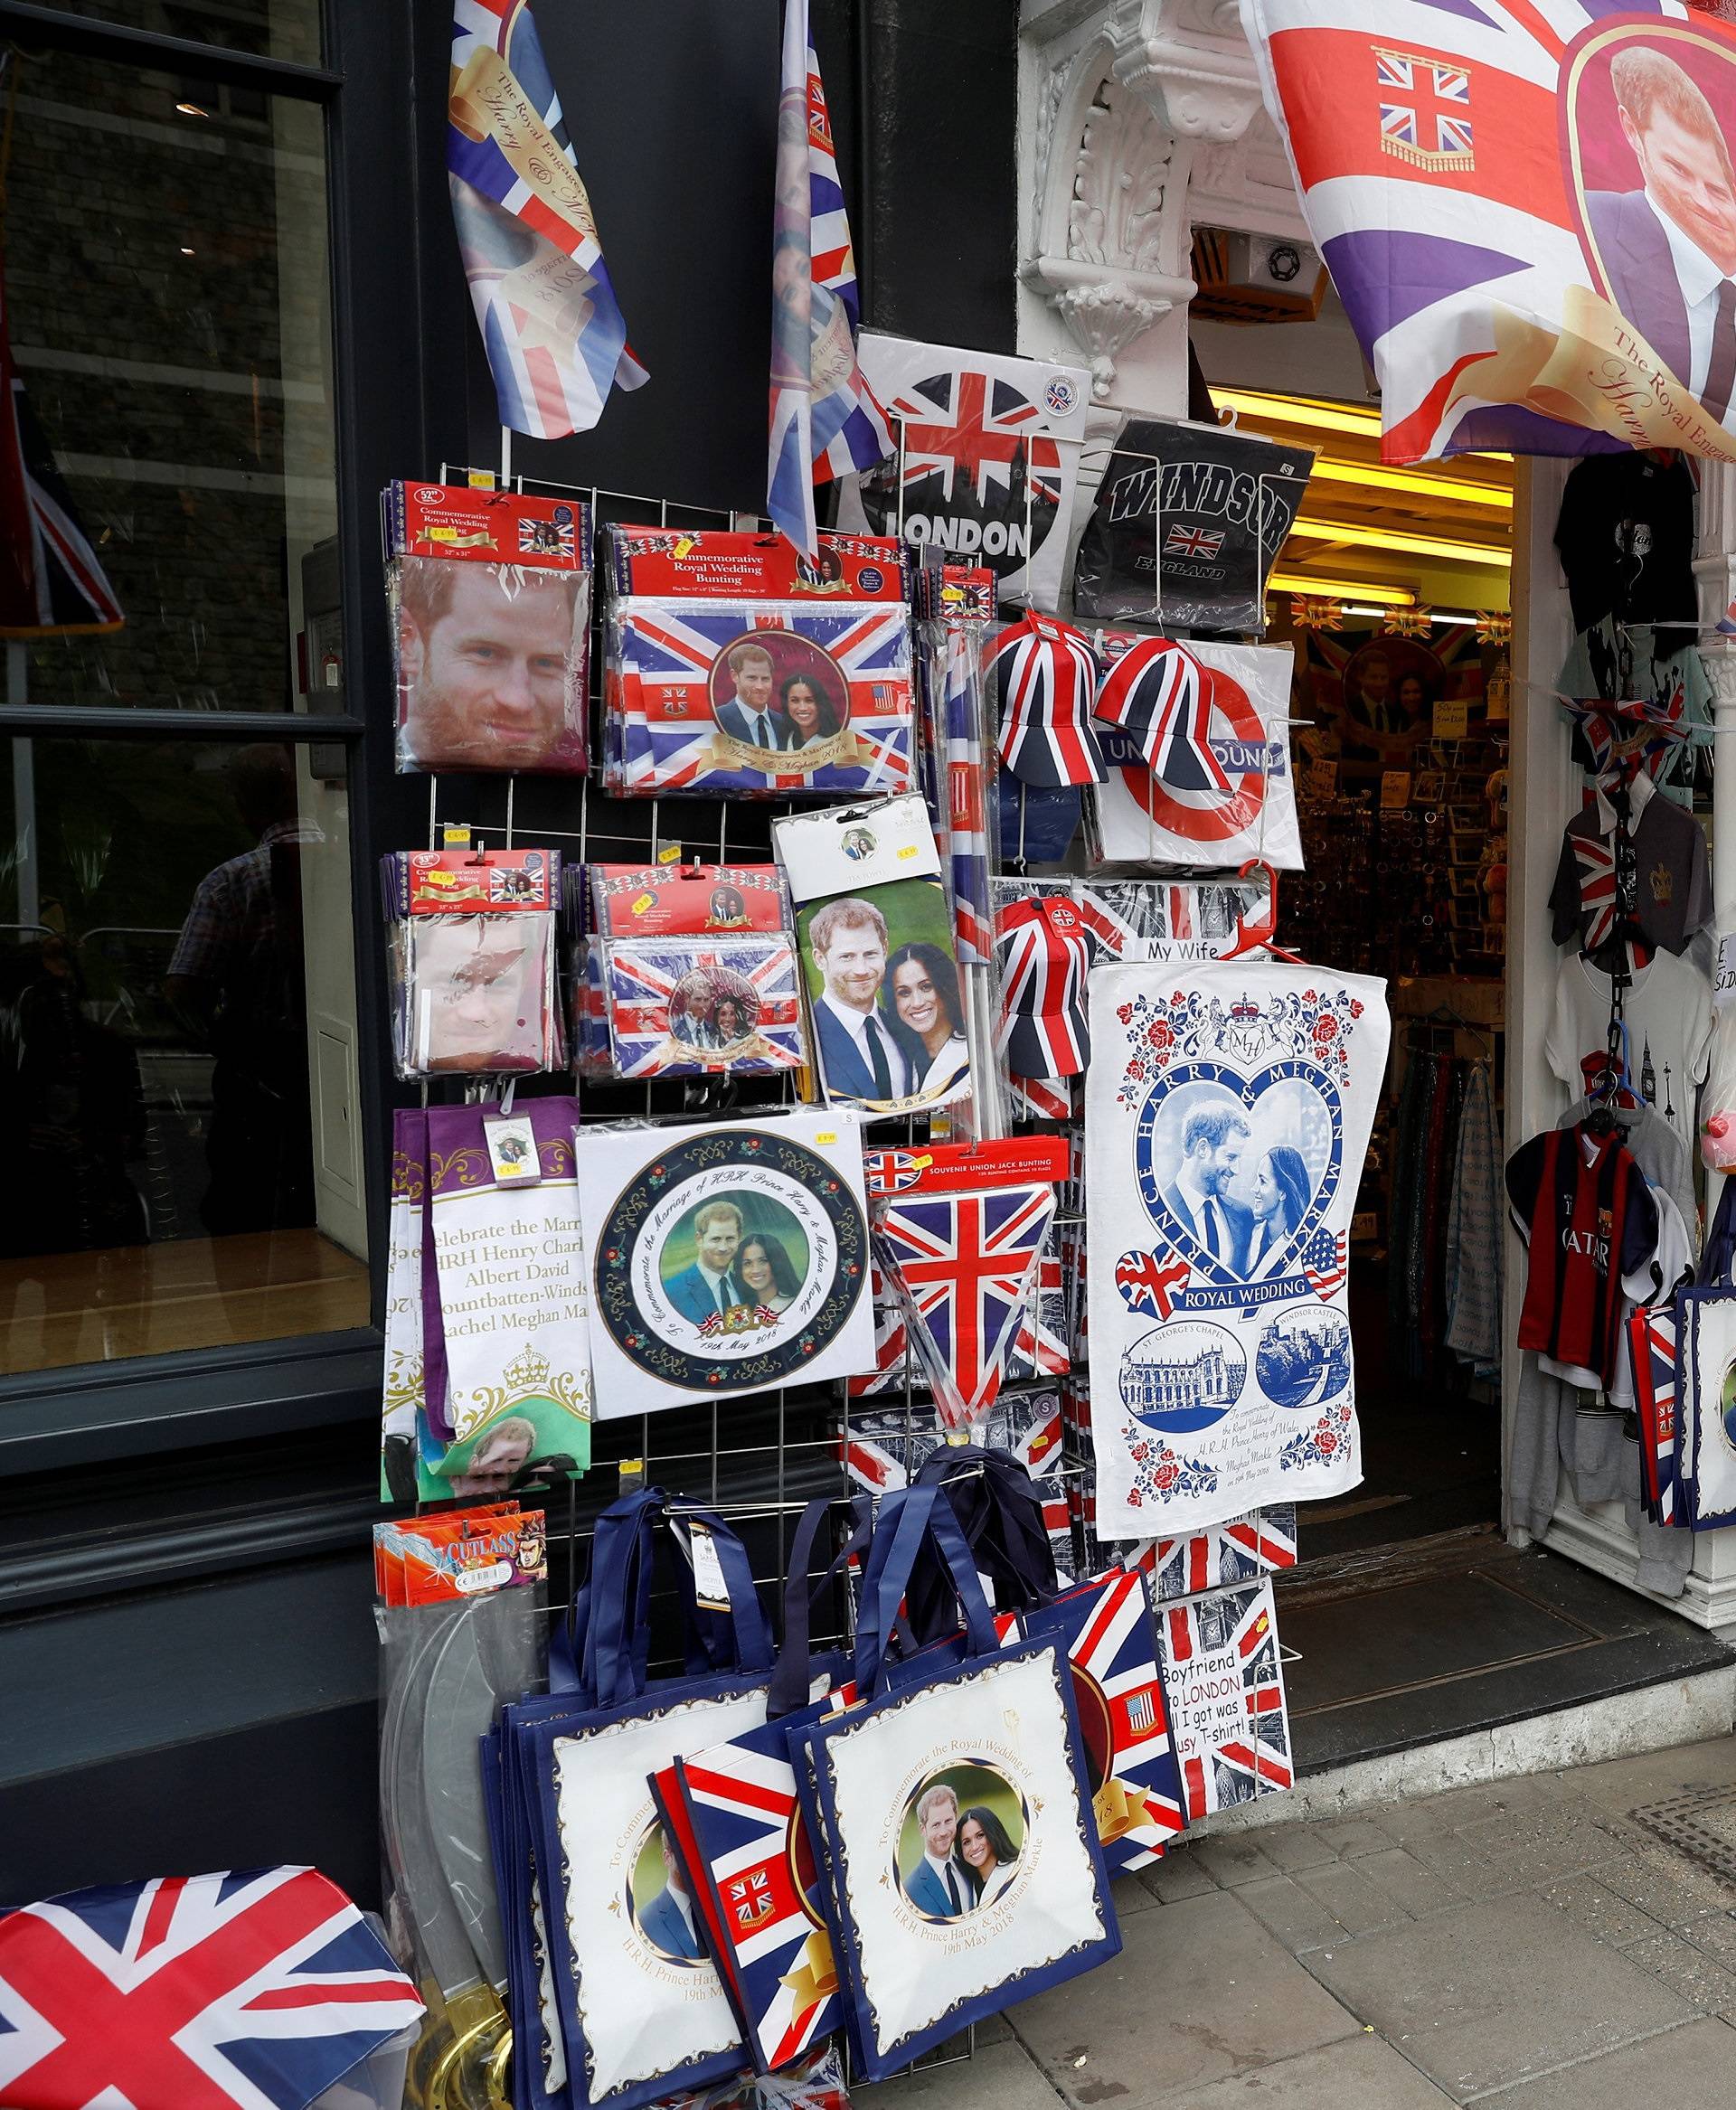 People browse for Royal Wedding souvenirs ahead of Prince Harry and Meghan Markle's wedding in Windsor